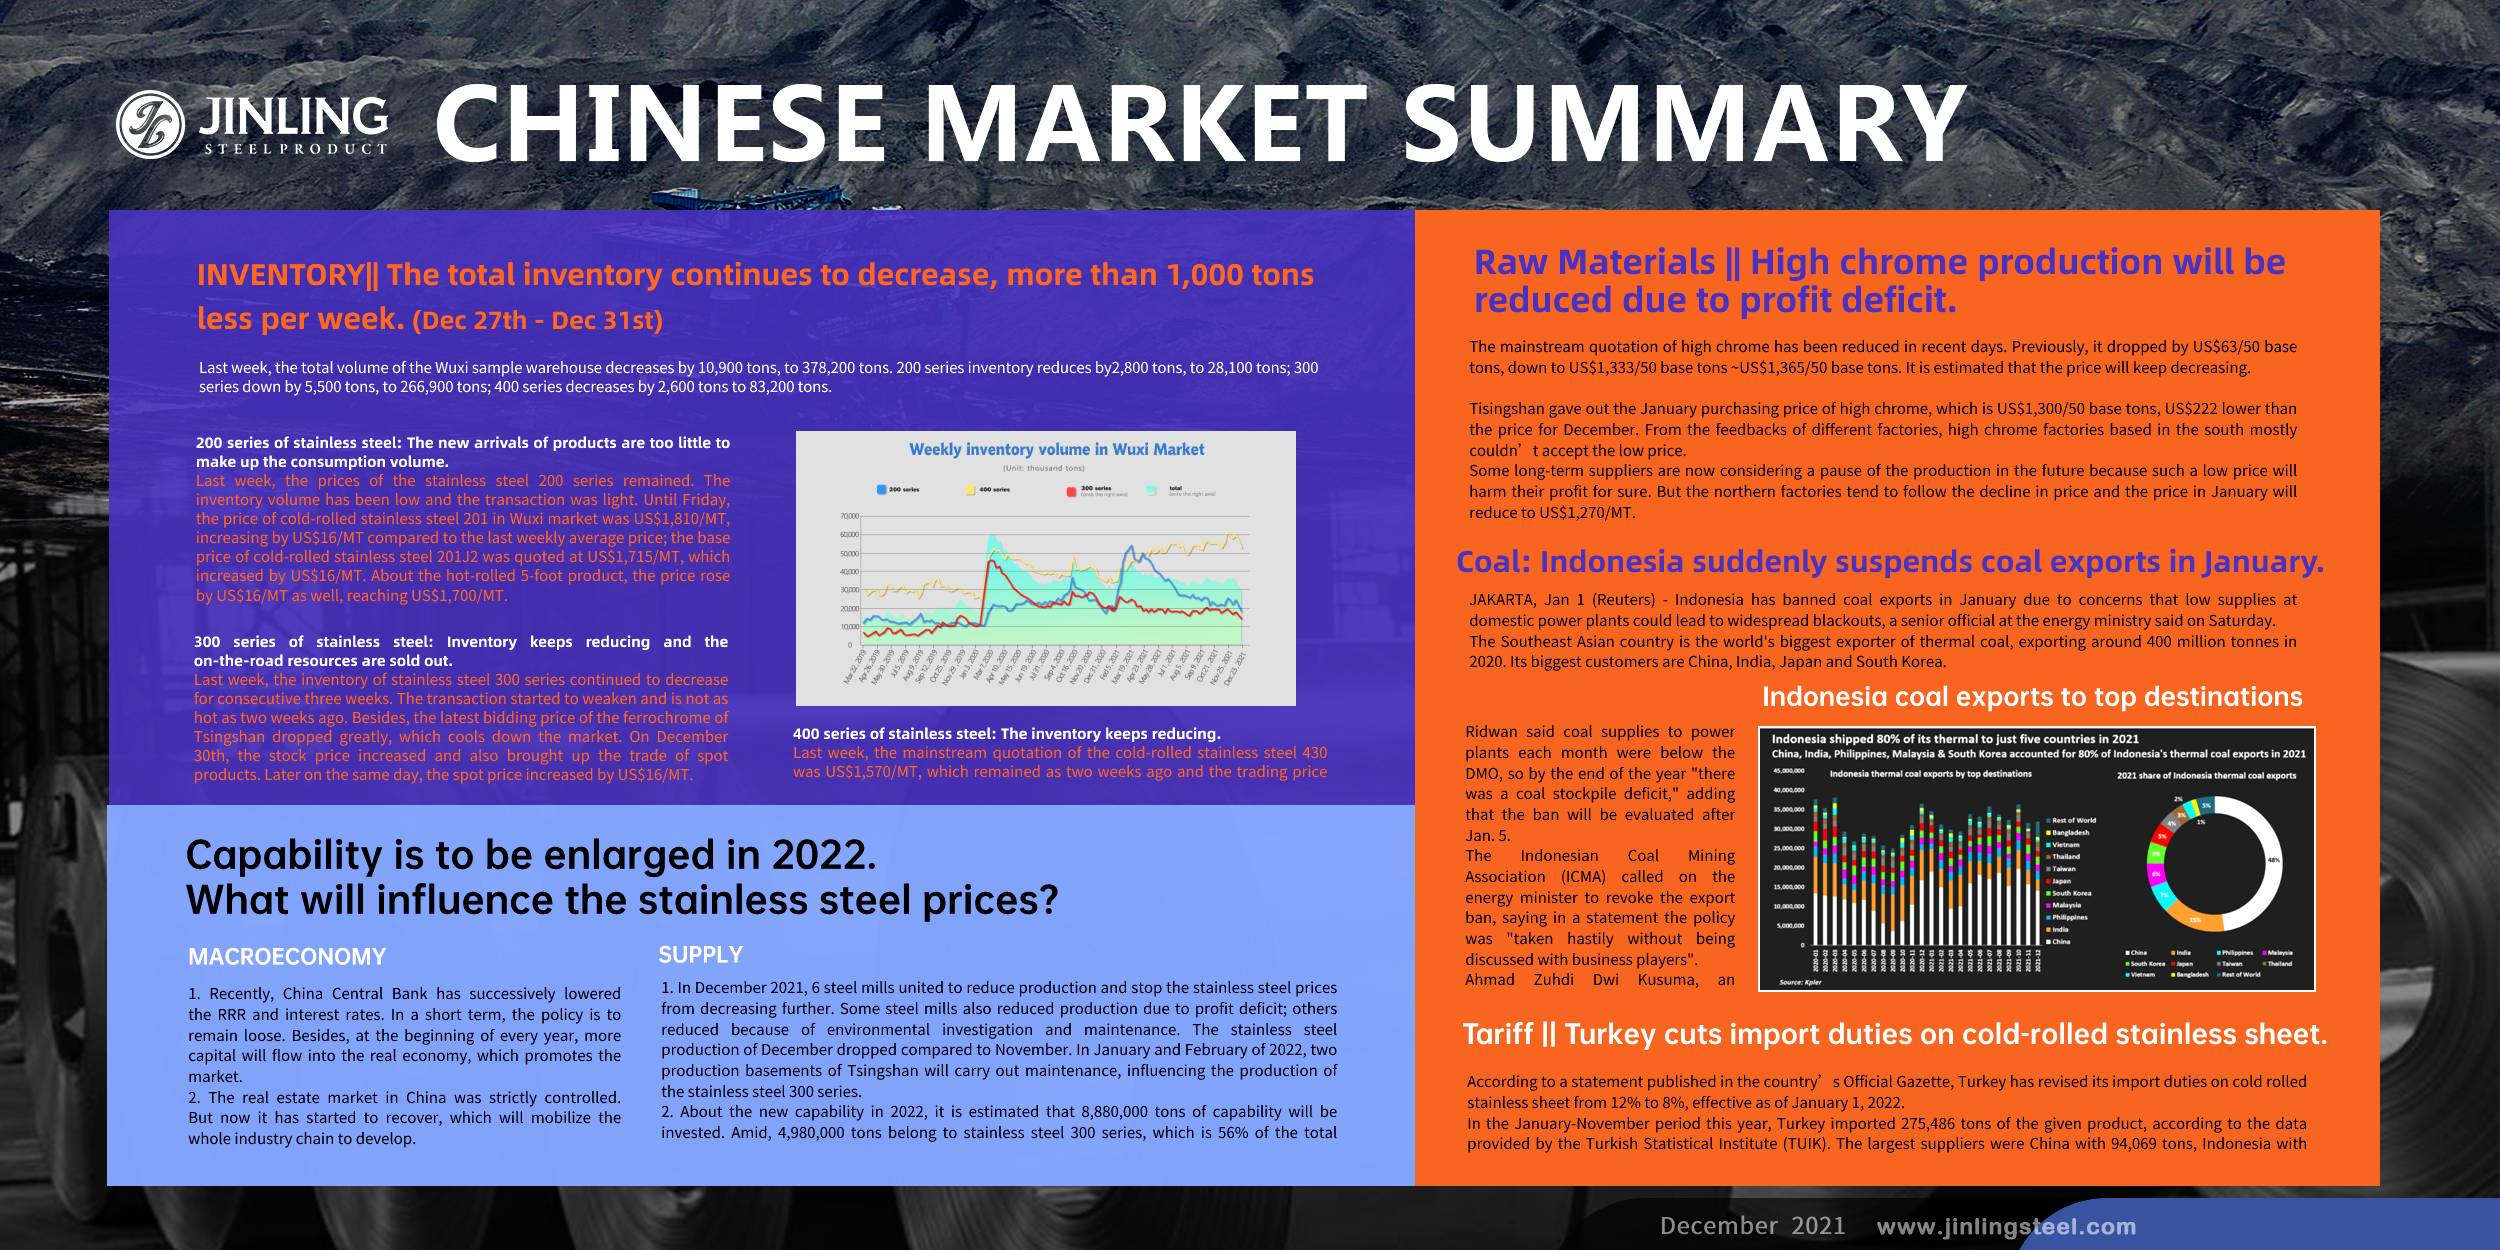 Stainless Steel Market Summary in China || lnventory reduces and prices to increase. Factors that affect the prices in 2022. (27th Dec~31st Dec)